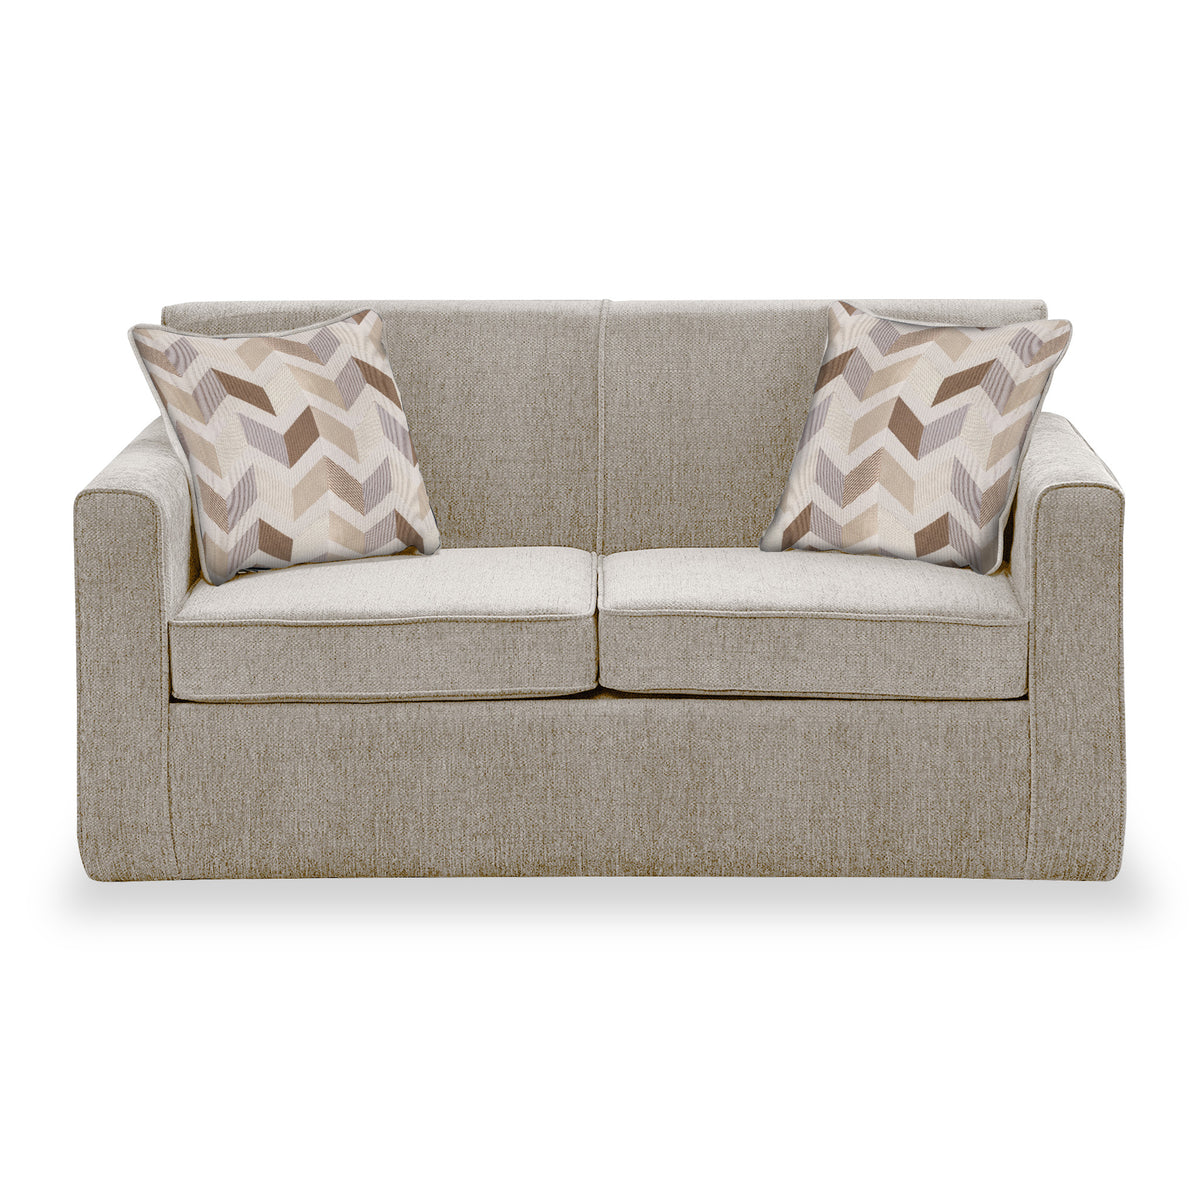 Welton Oatmeal Soft Weave 2 Seater Sofa Bed with Morelisa Oatmeal 